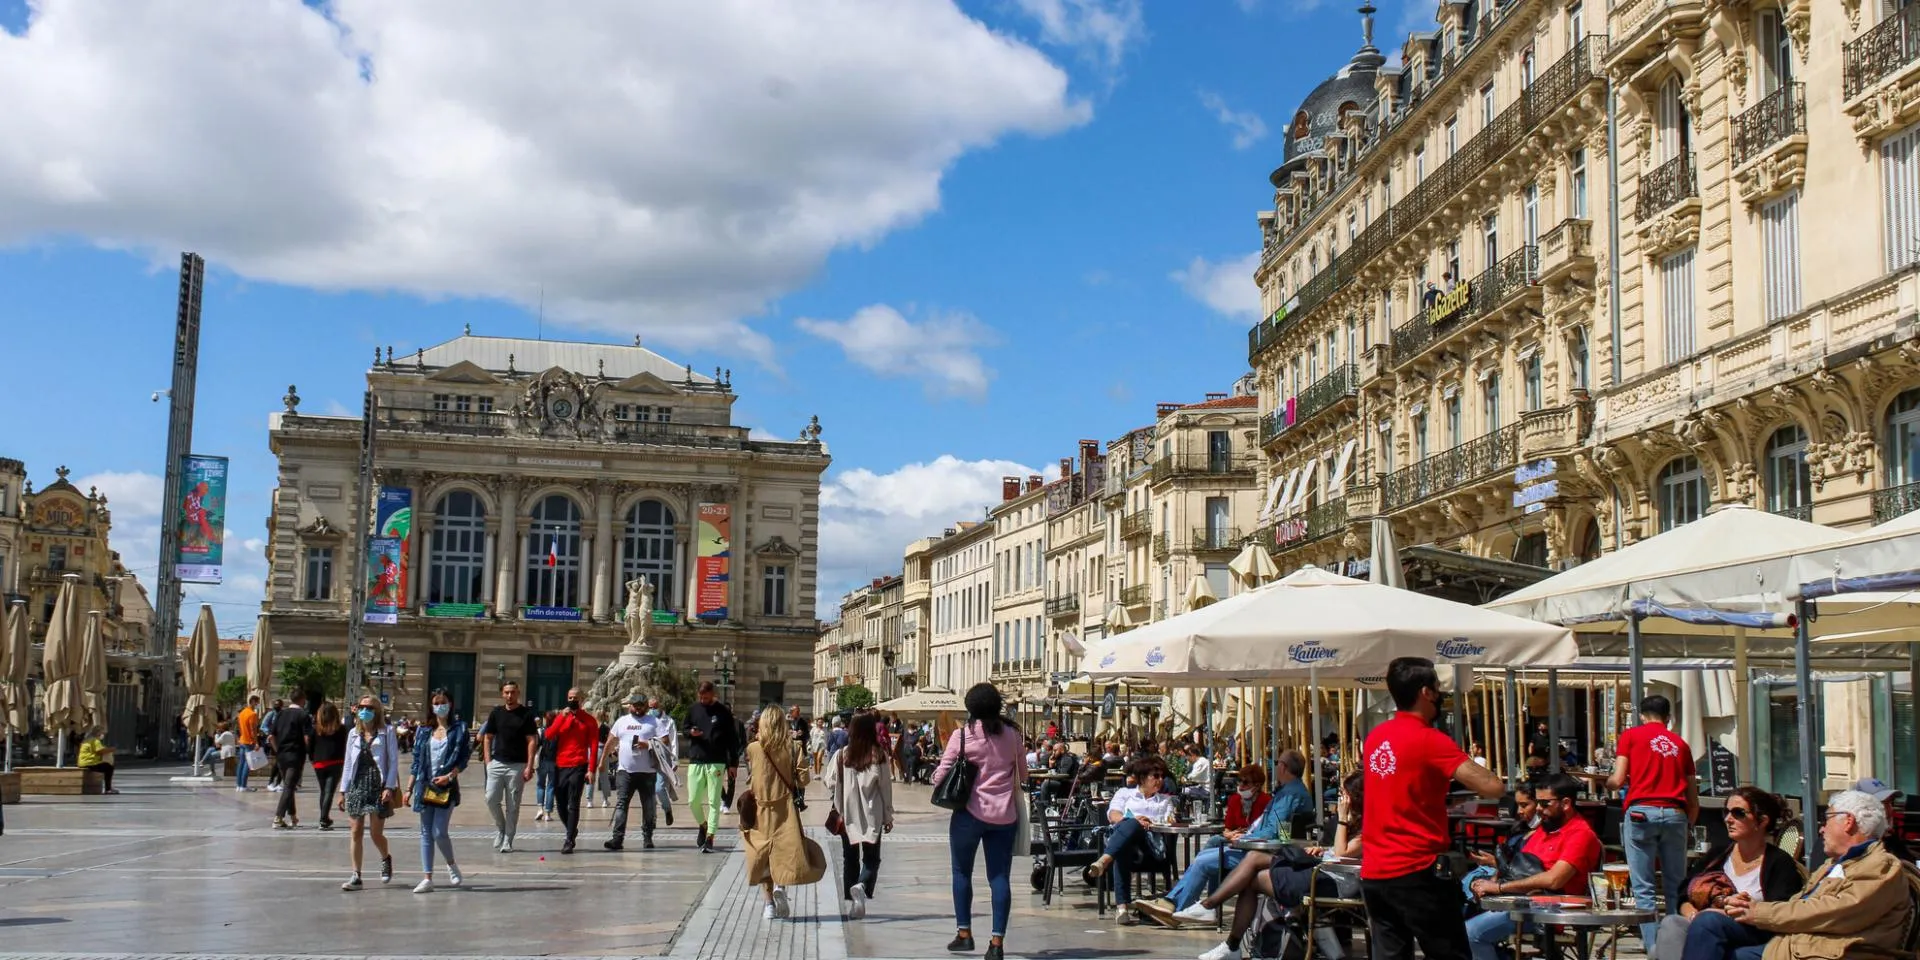 Place de la Comedie in France, Europe | Architecture - Rated 3.9